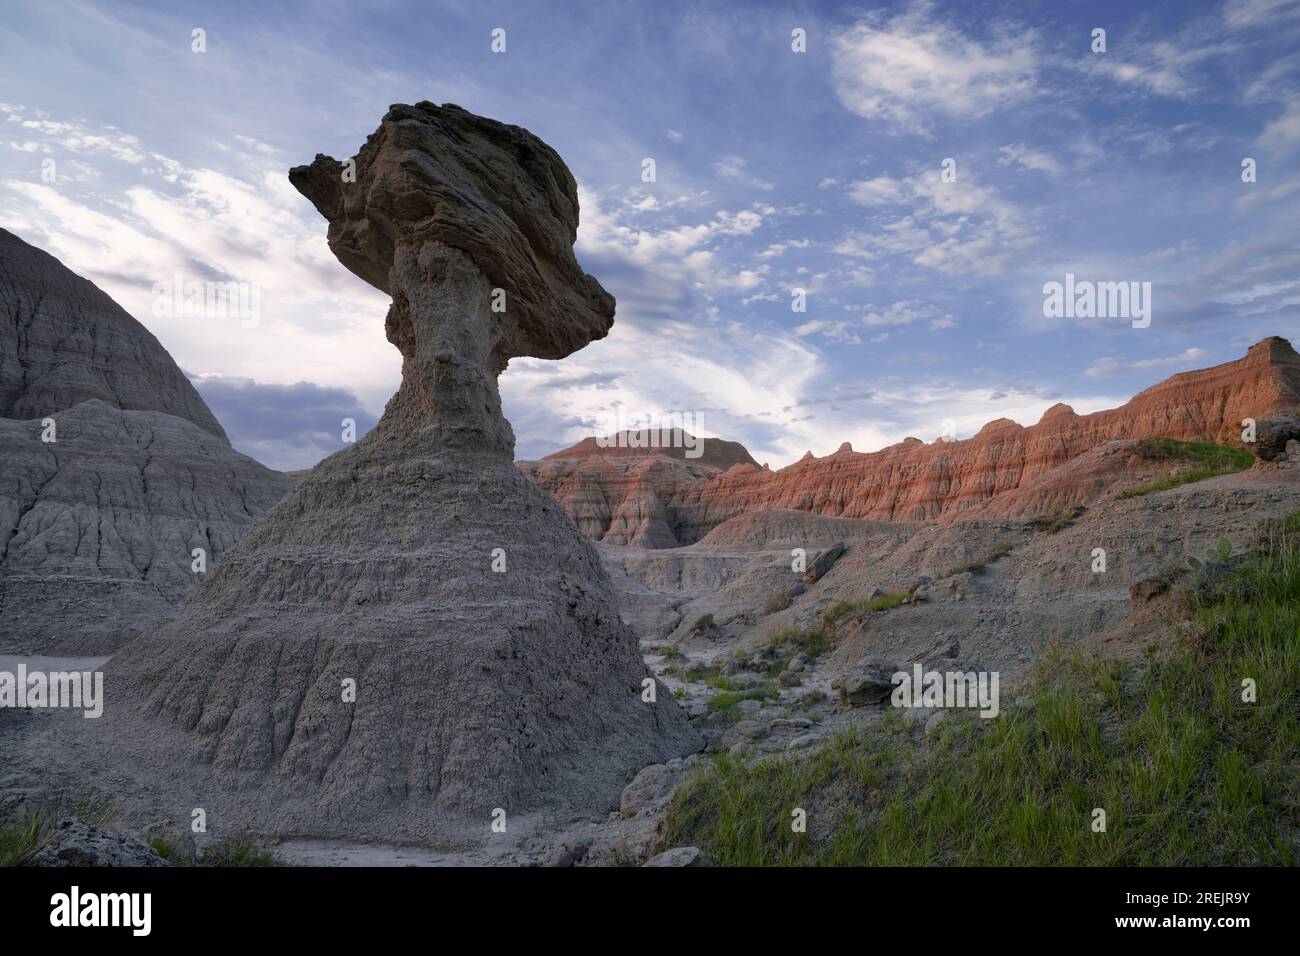 Early morning clouds pass over the large hoodoo known as Toadstool Rock near Norbeck Pass in South Dakota's Badlands National Park. Stock Photo